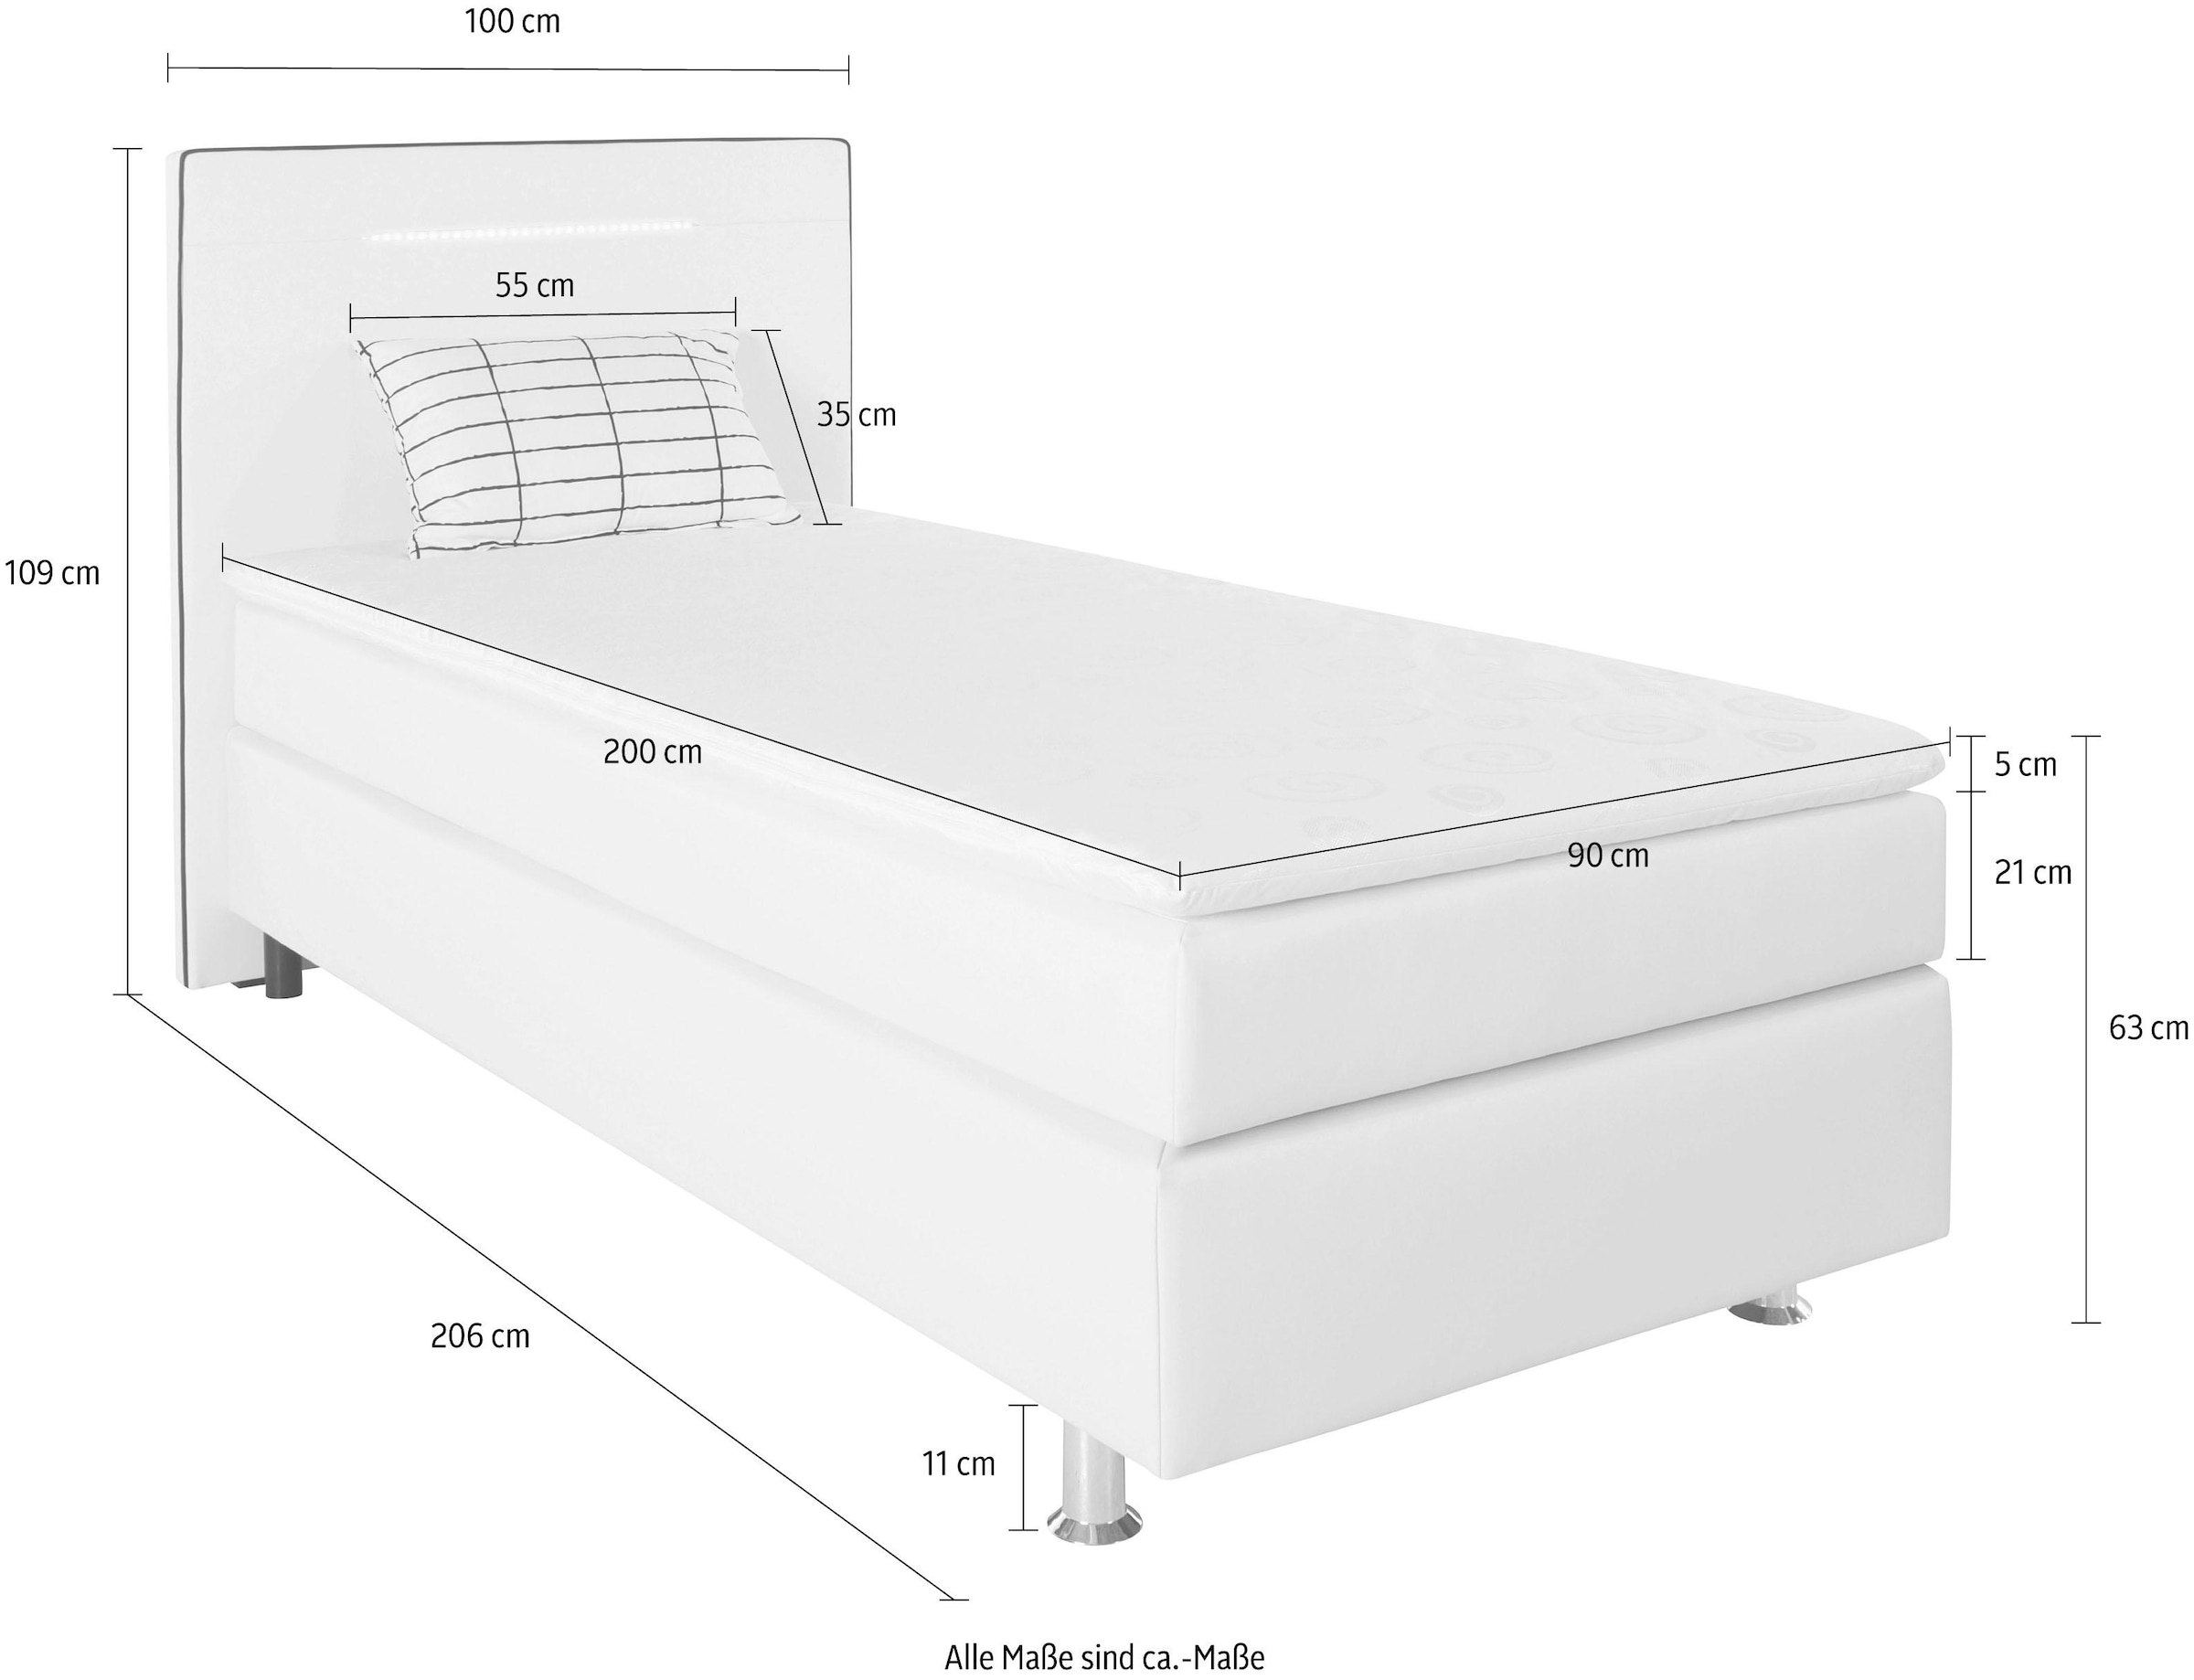 COLLECTION AB Boxspringbett, inkl. LED-Beleuchtung, Topper und Kissen